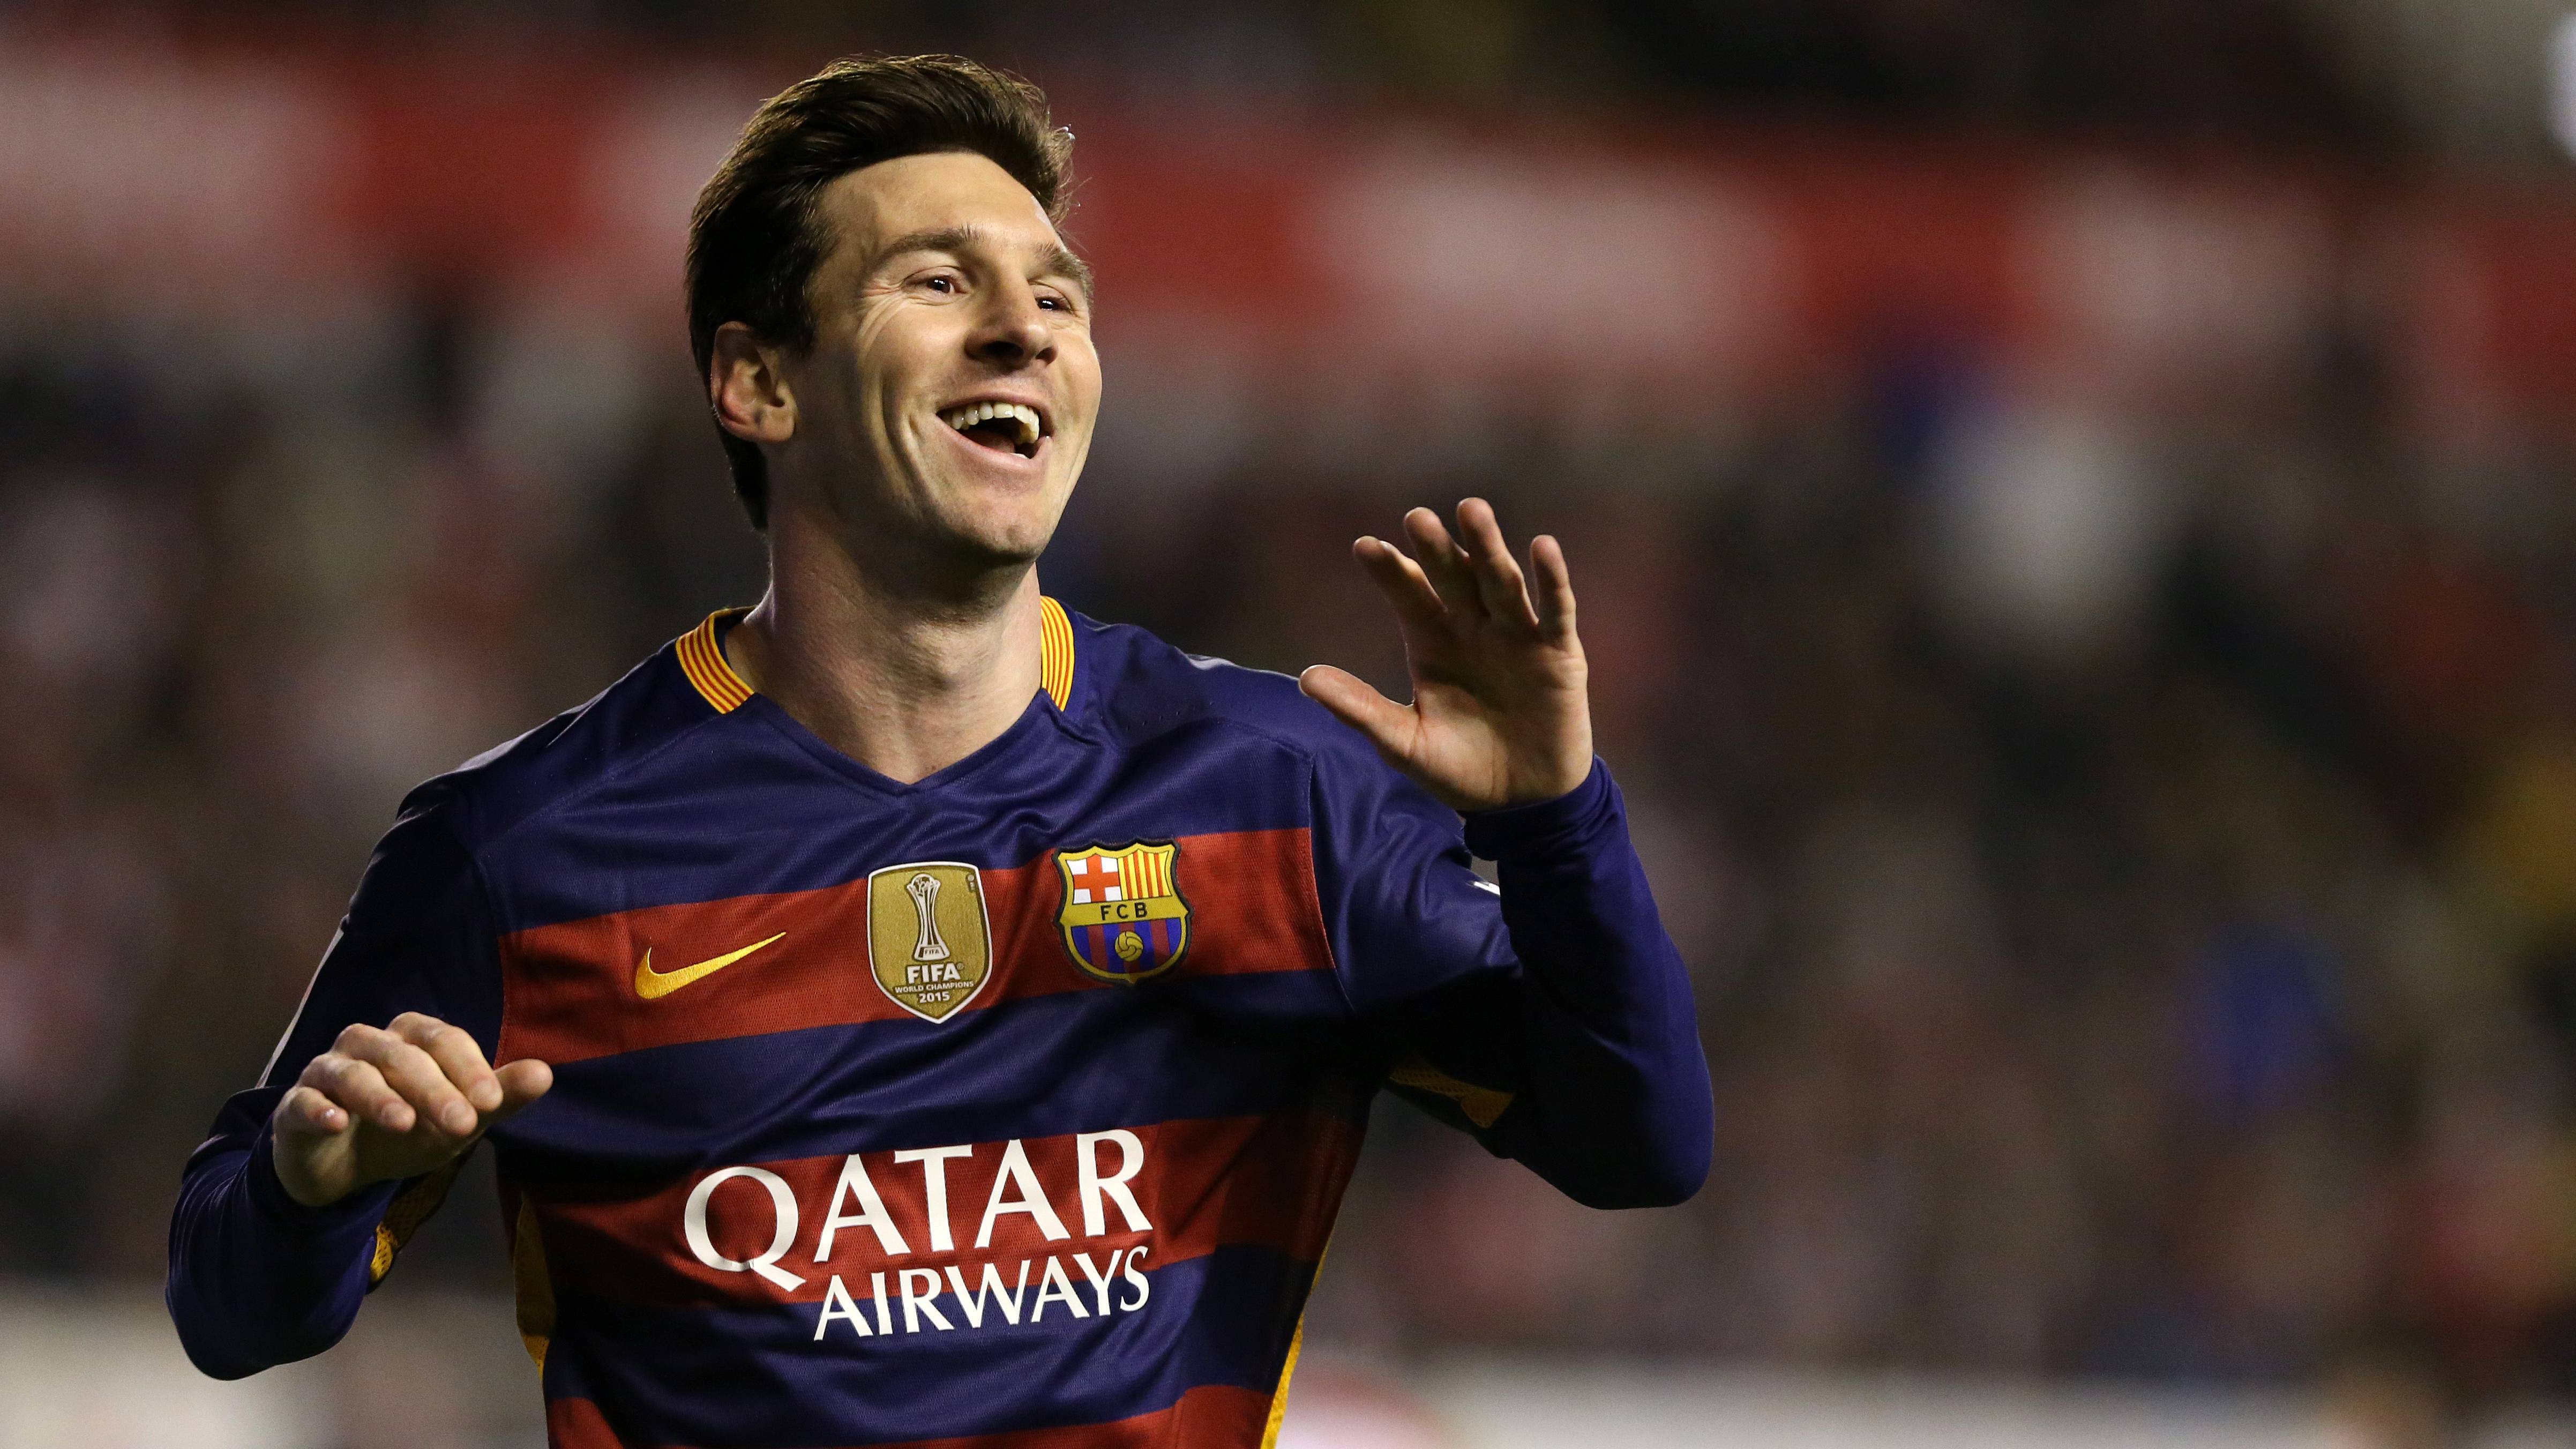 Leo Messi, smiling after marking a goal with the Barça